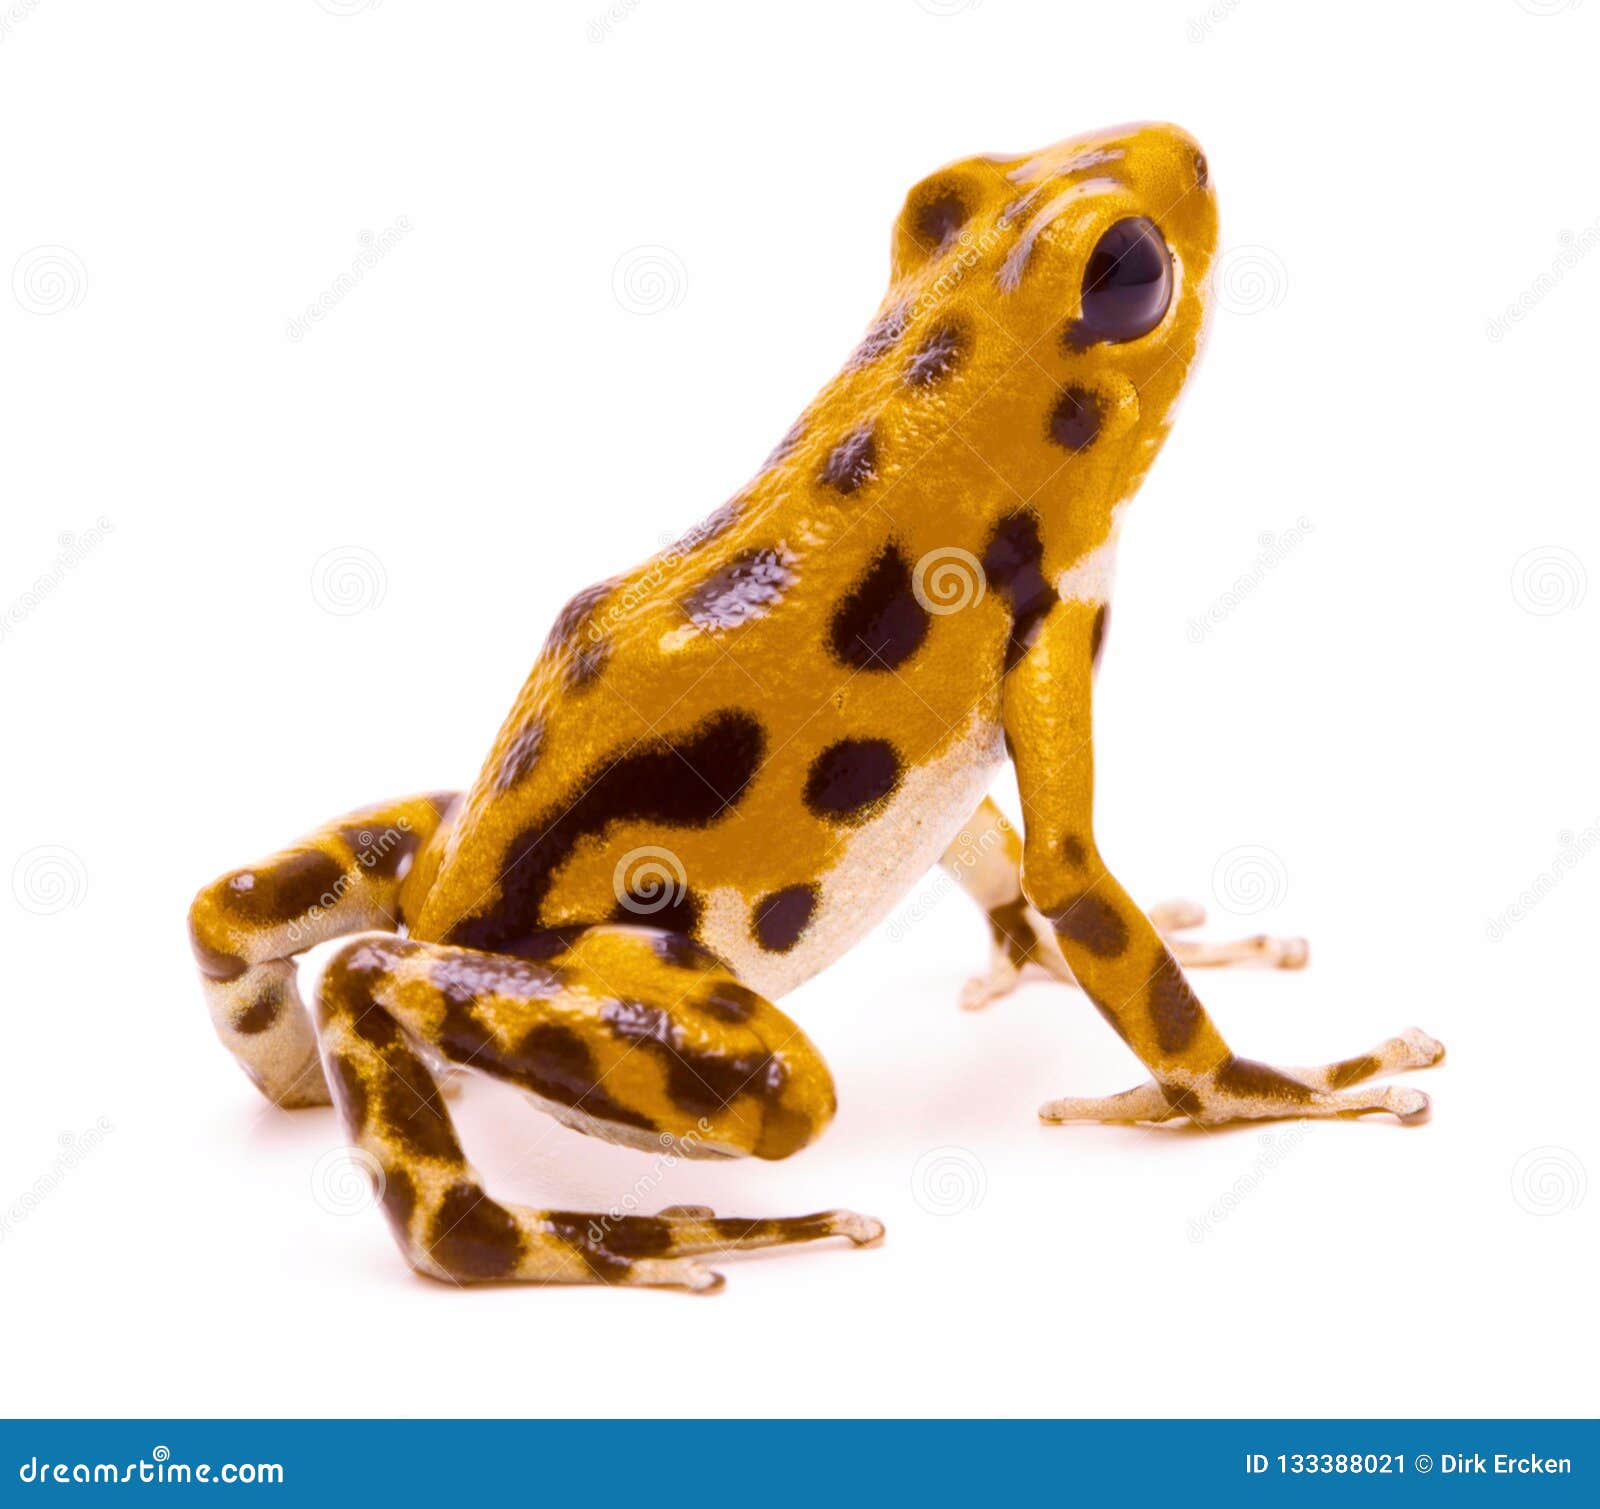 poison dart or arrow frog from the island bastimentos